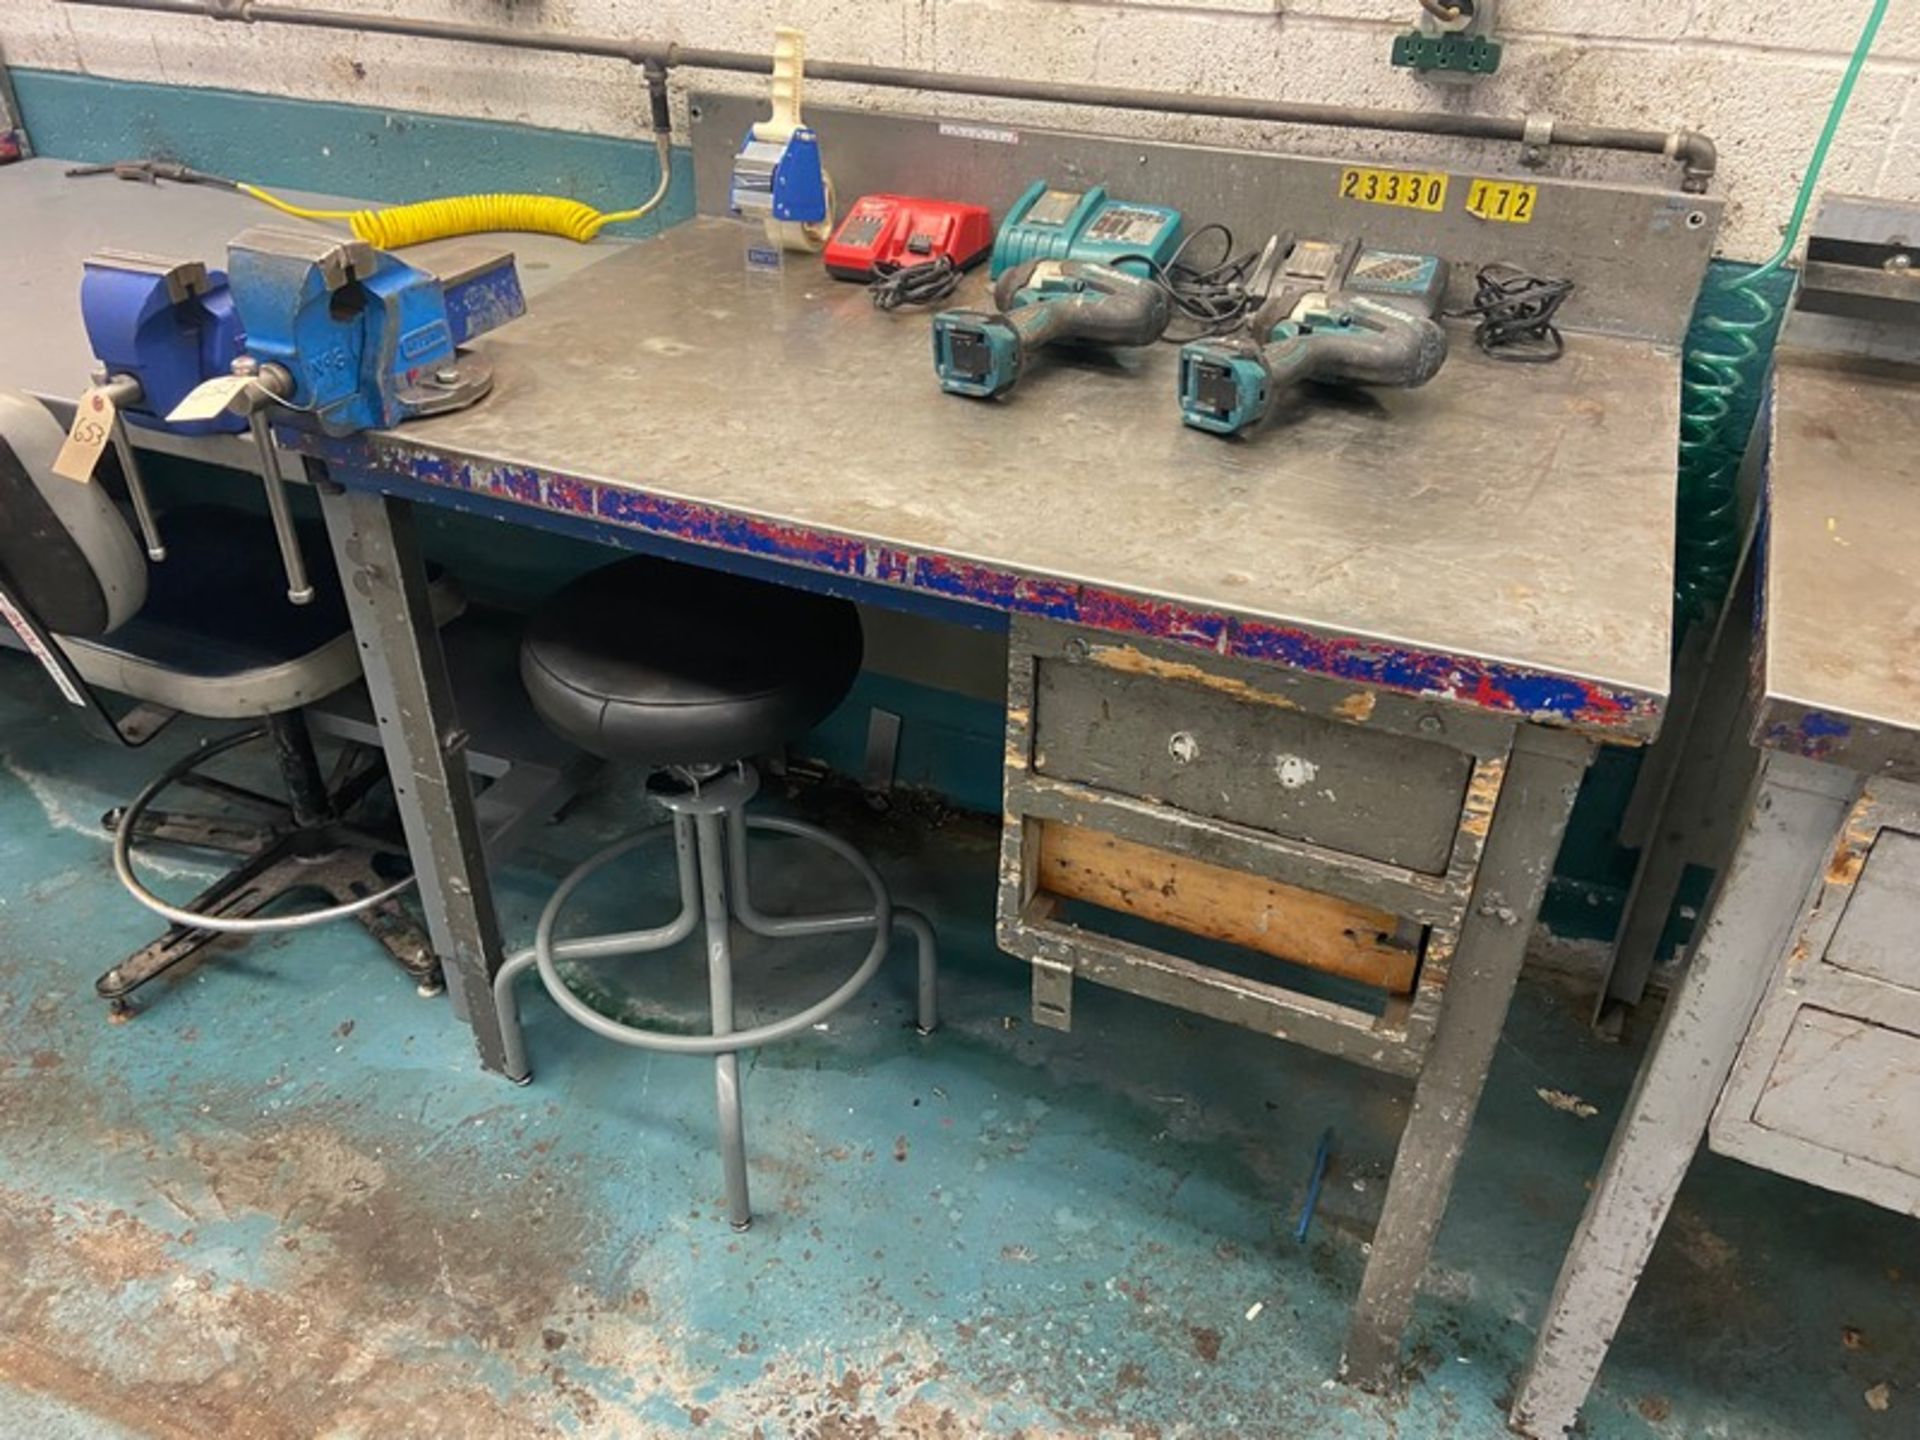 Machine Shop Work Station, with Vise Stool, Overall Dims. of Table: Aprox. 98 In. L x 32 In. W x